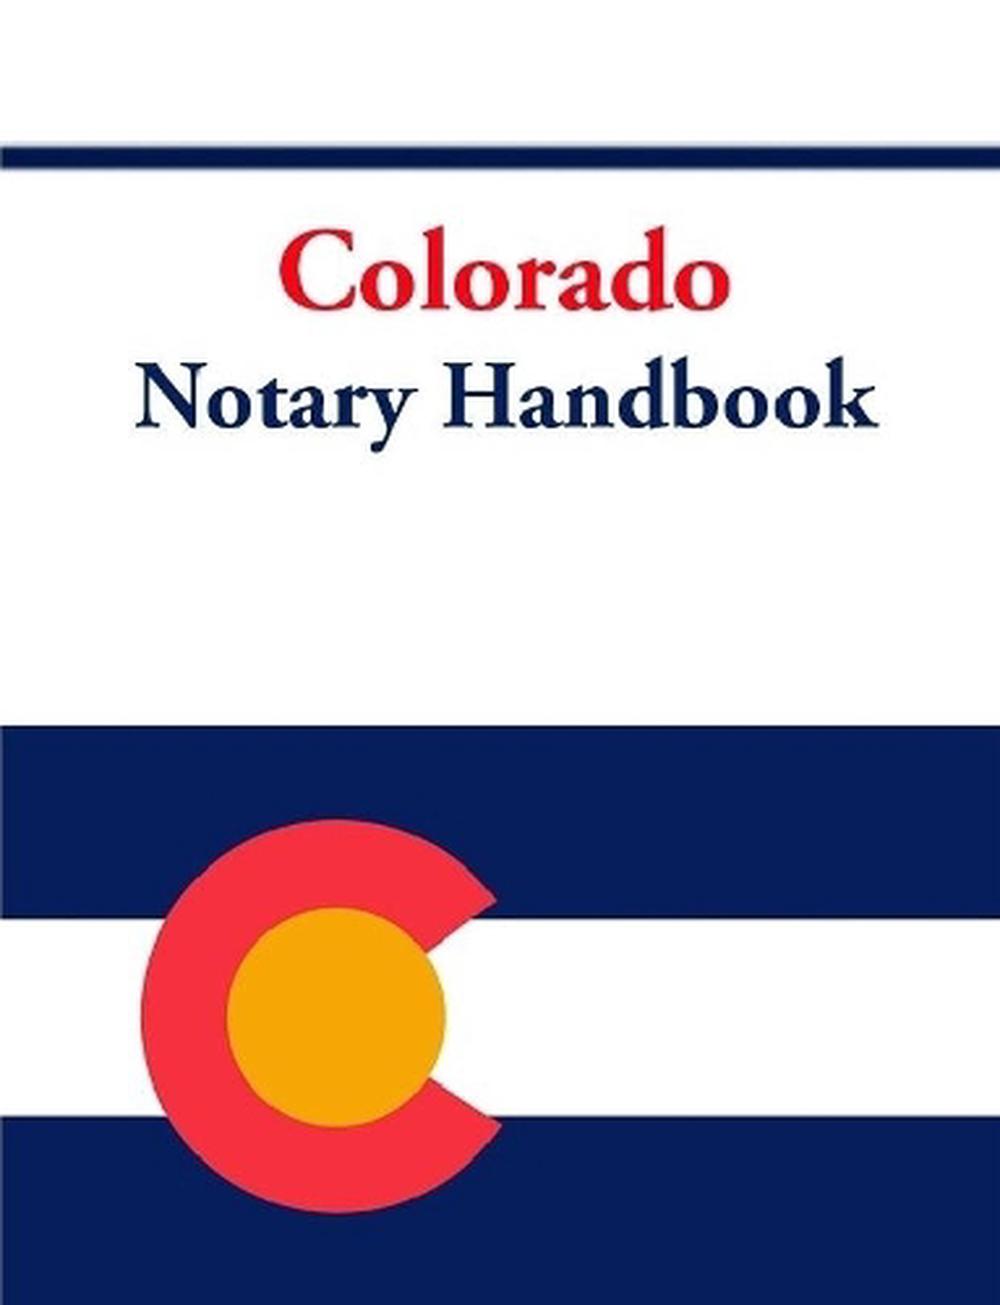 does a will have to be notarized in colorado